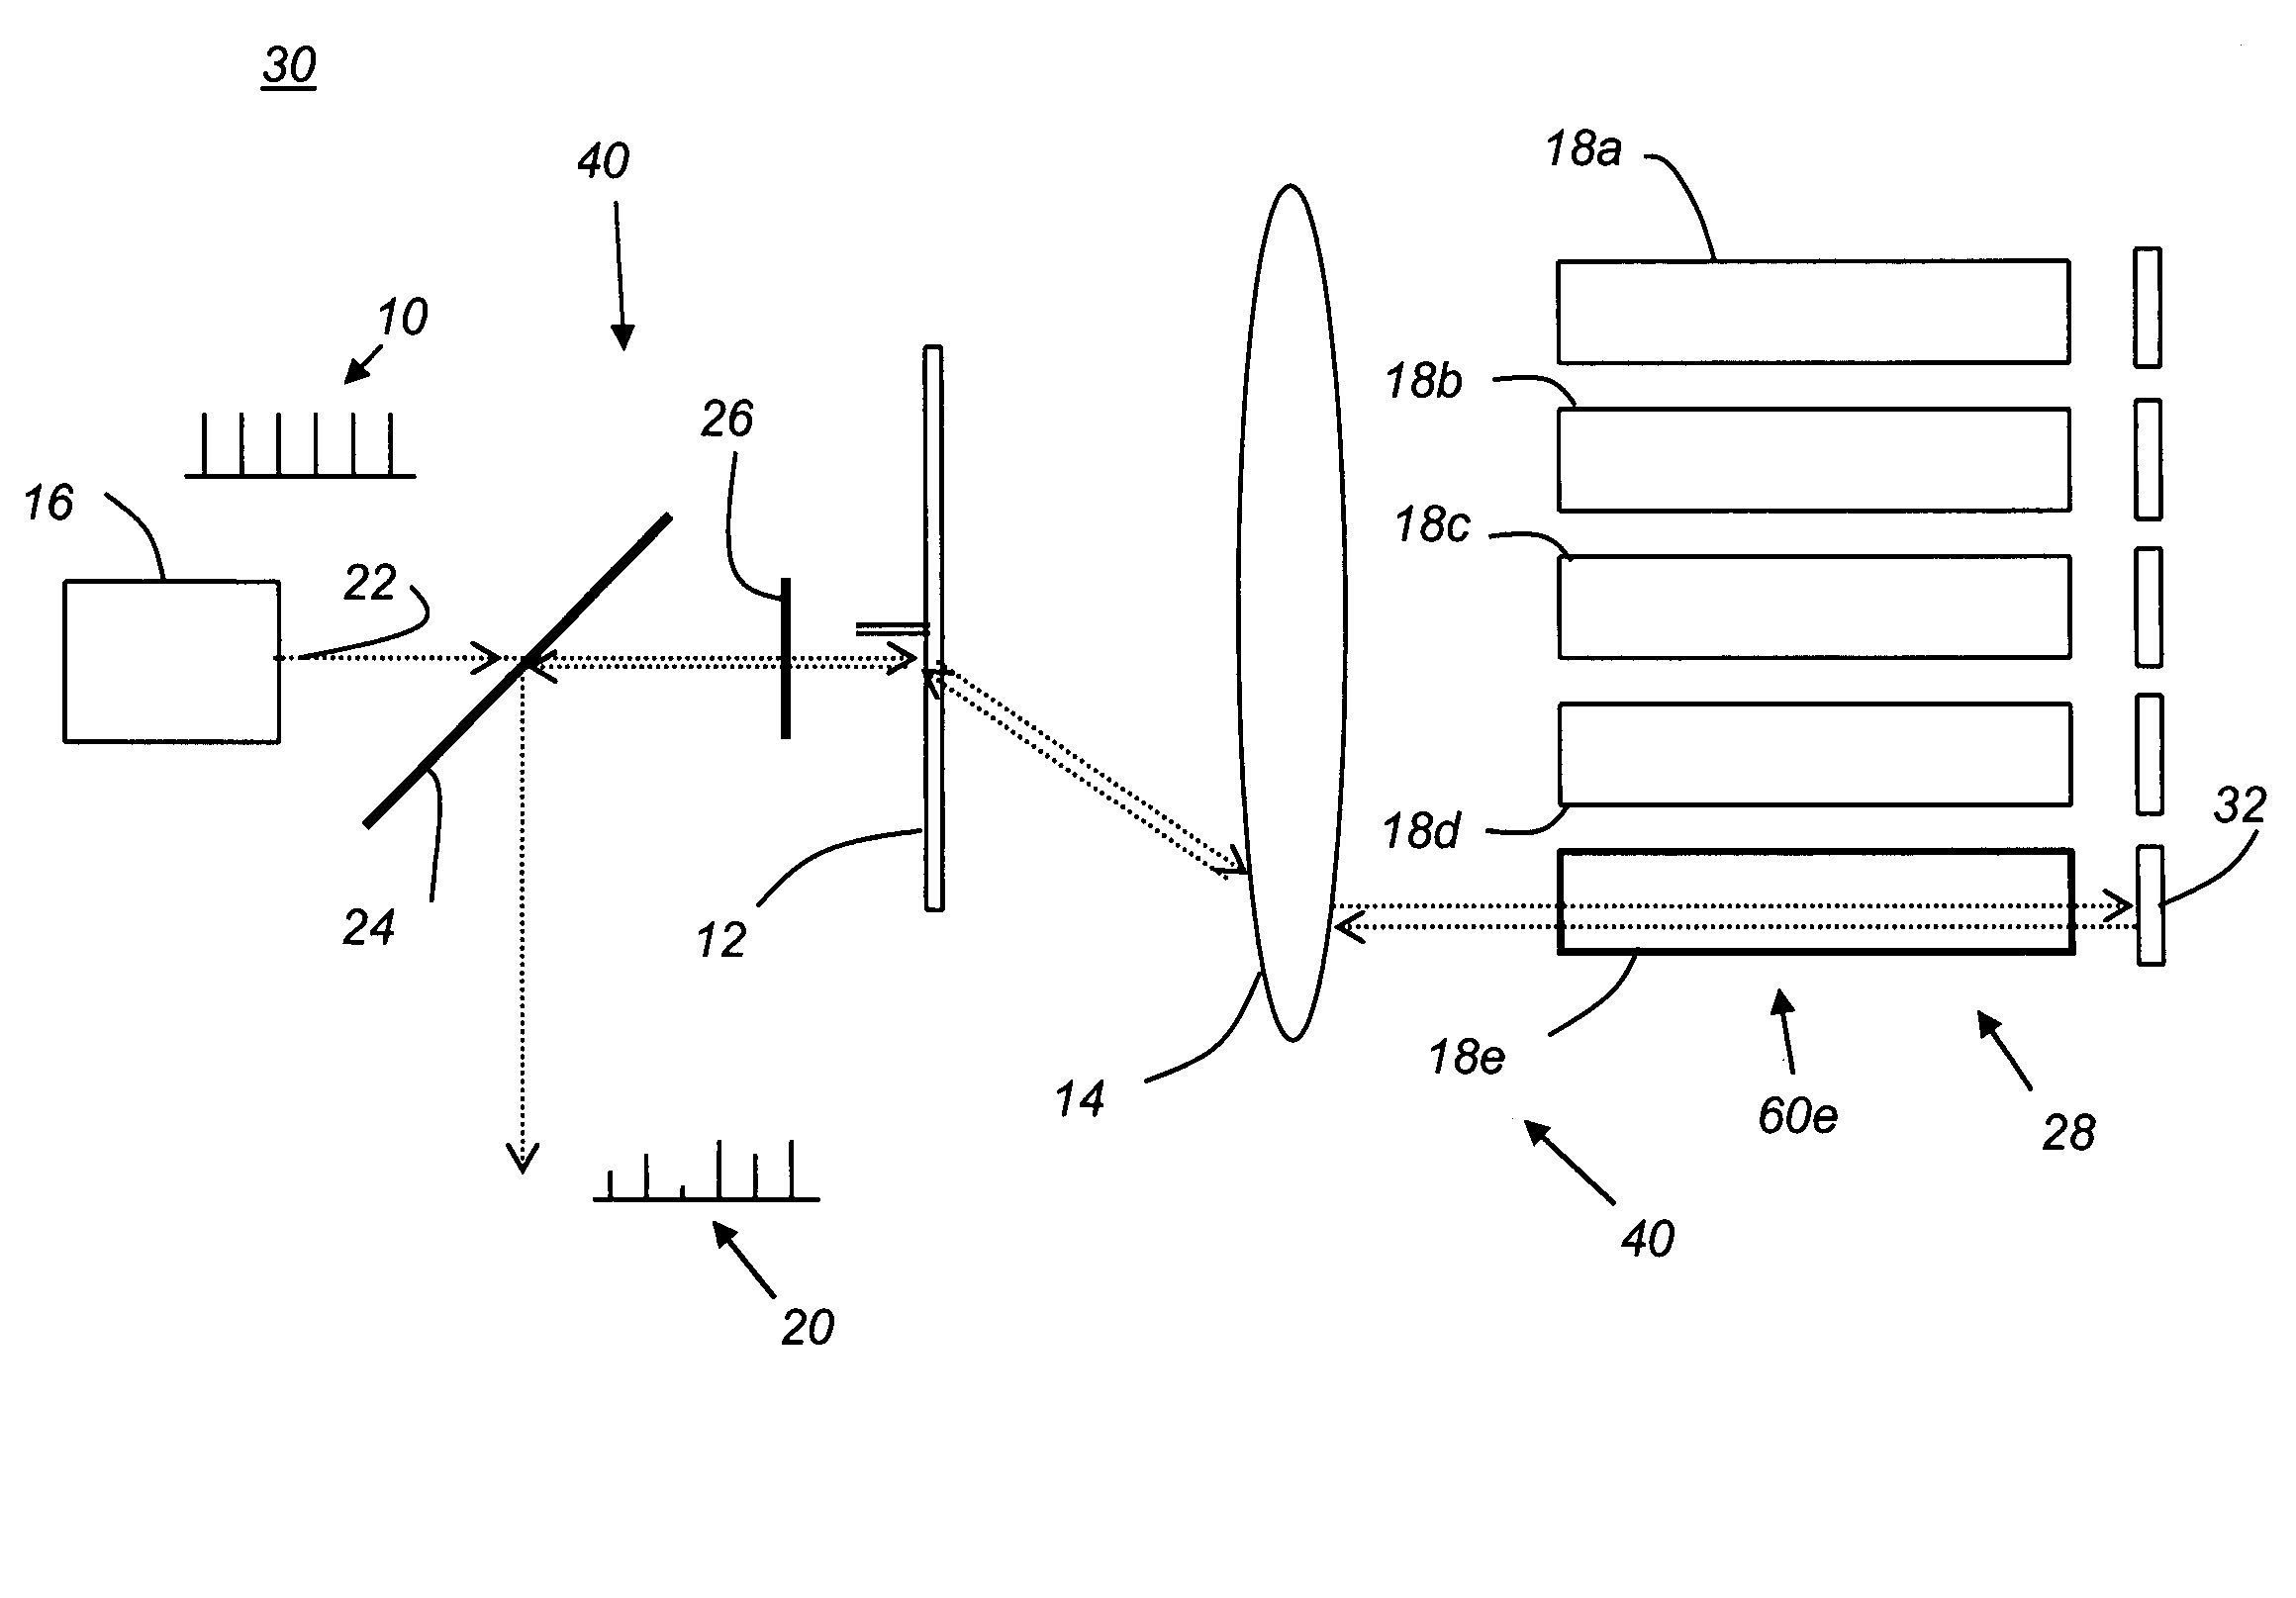 Optical power modulation at high frequency